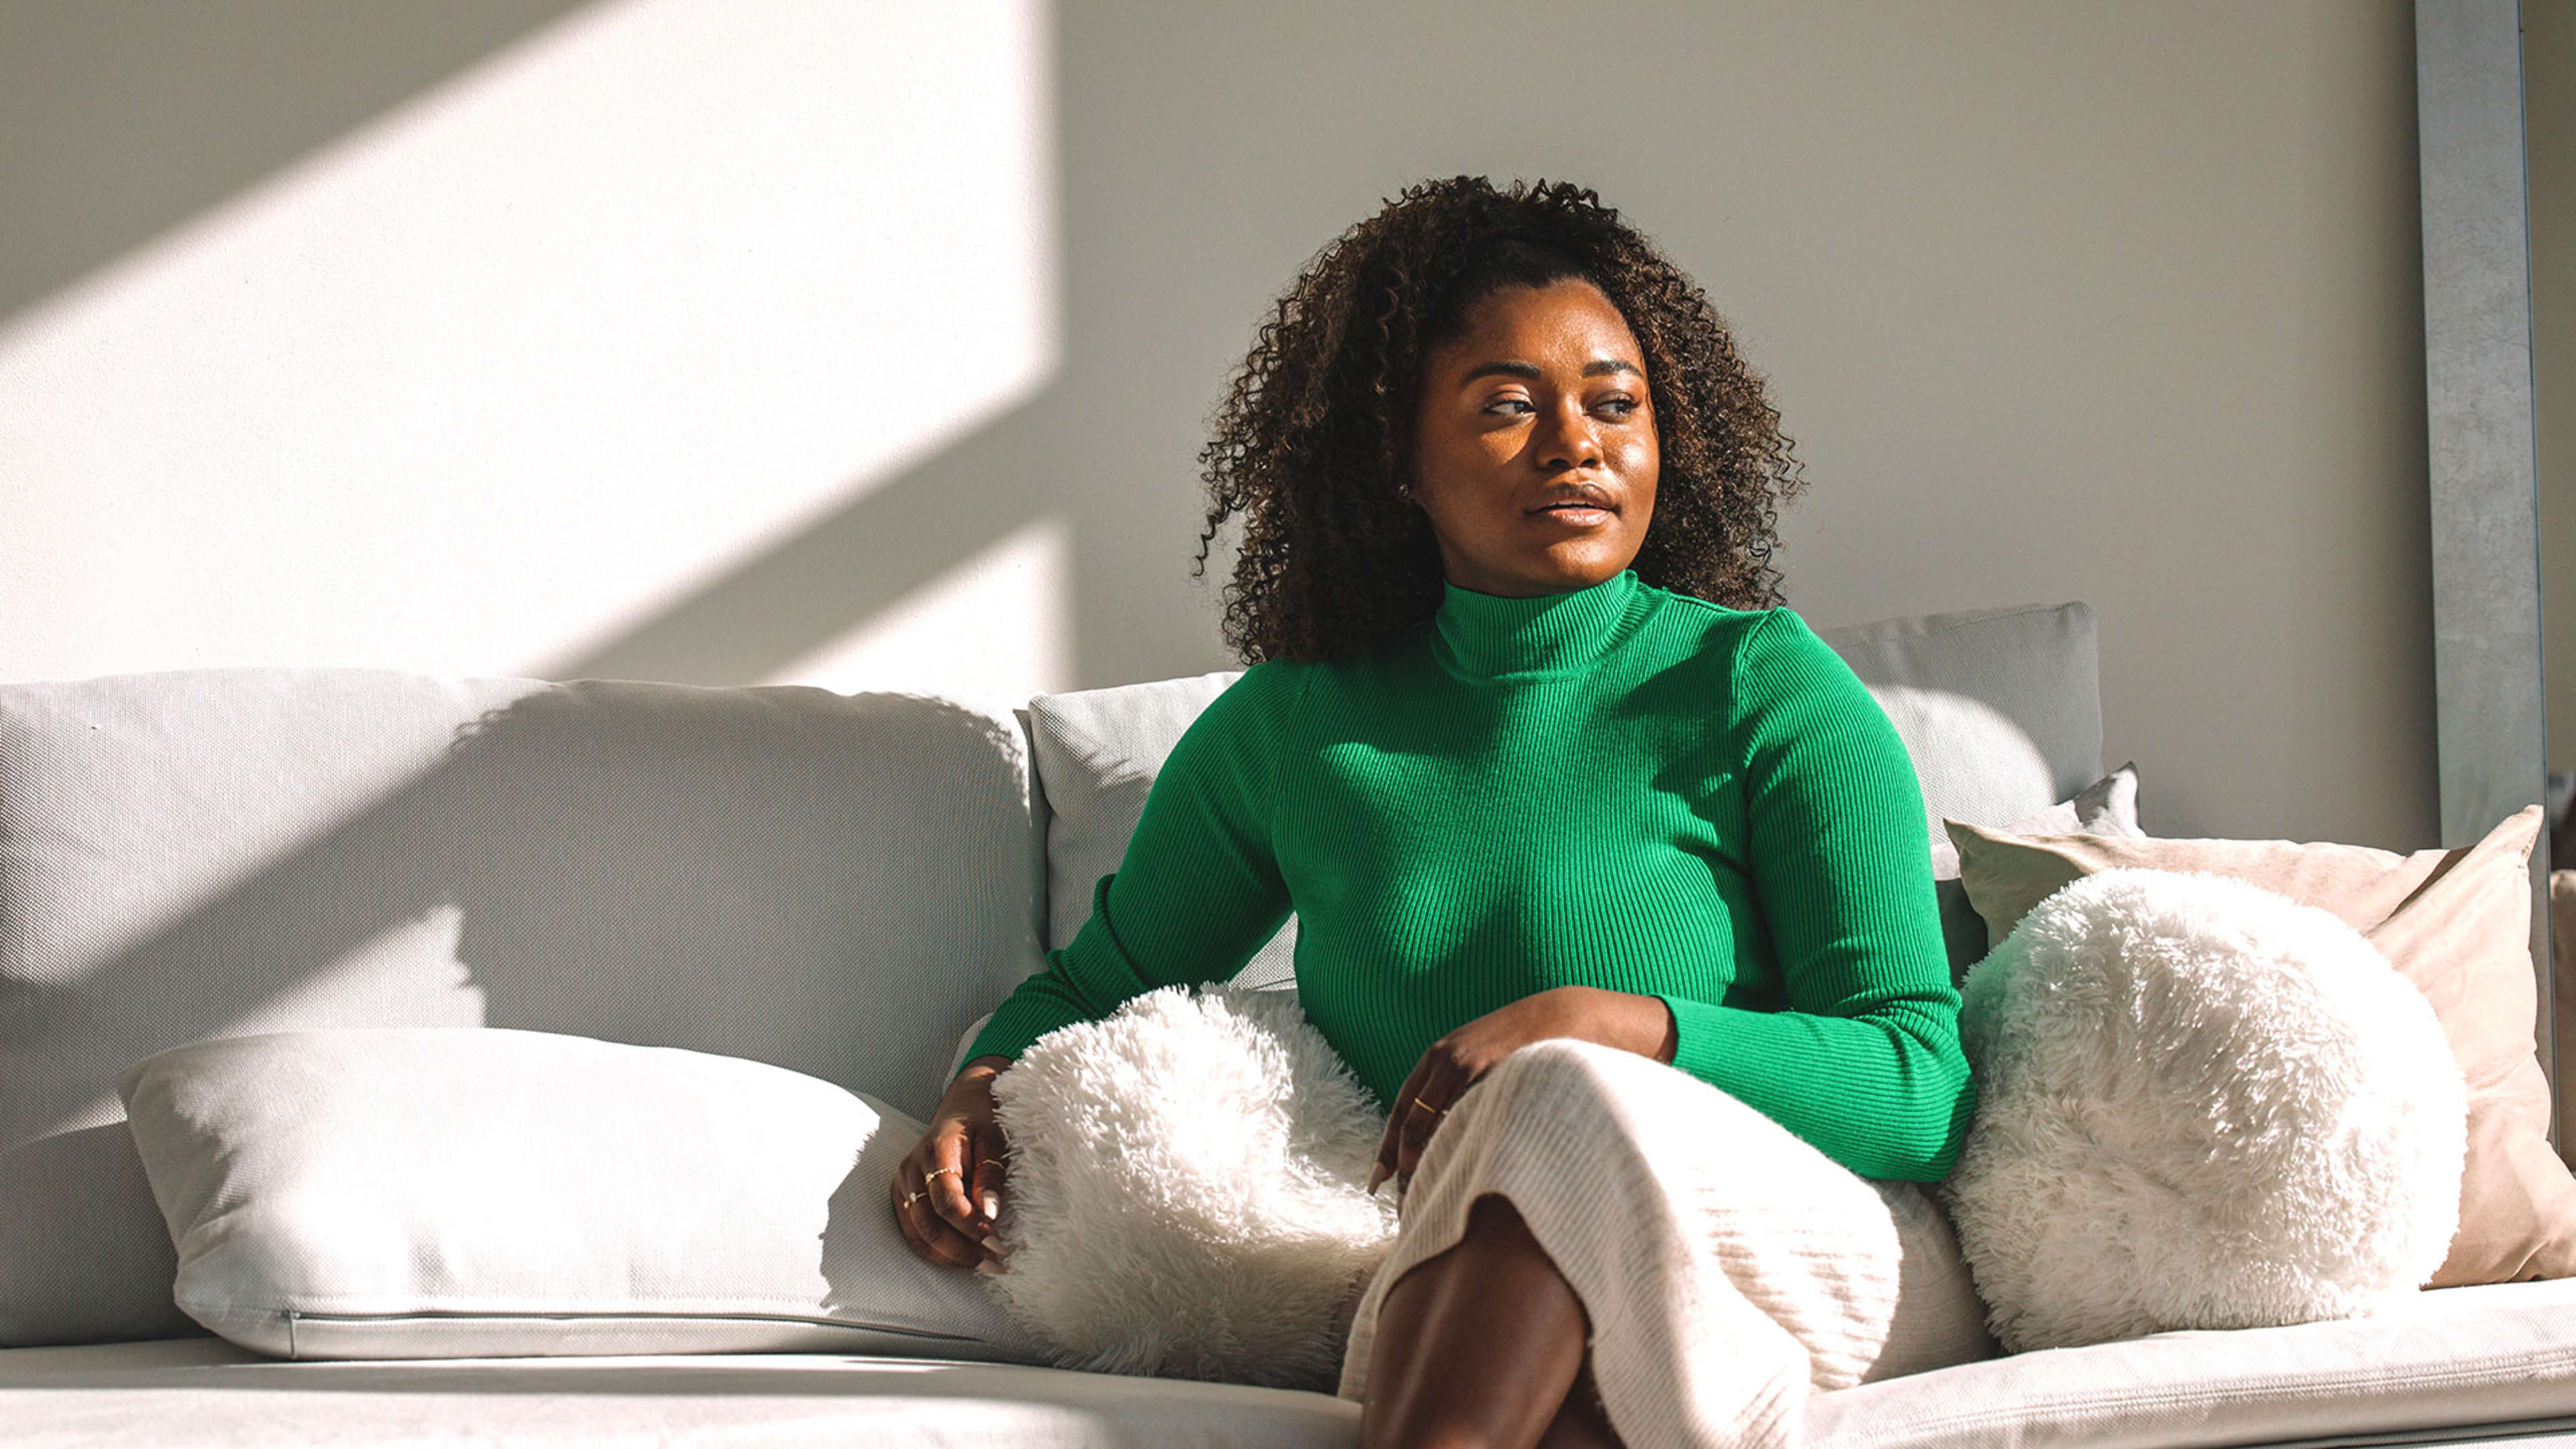 Meet the 27-year-old investor who is teaching Black Gen Z girls about financial literacy